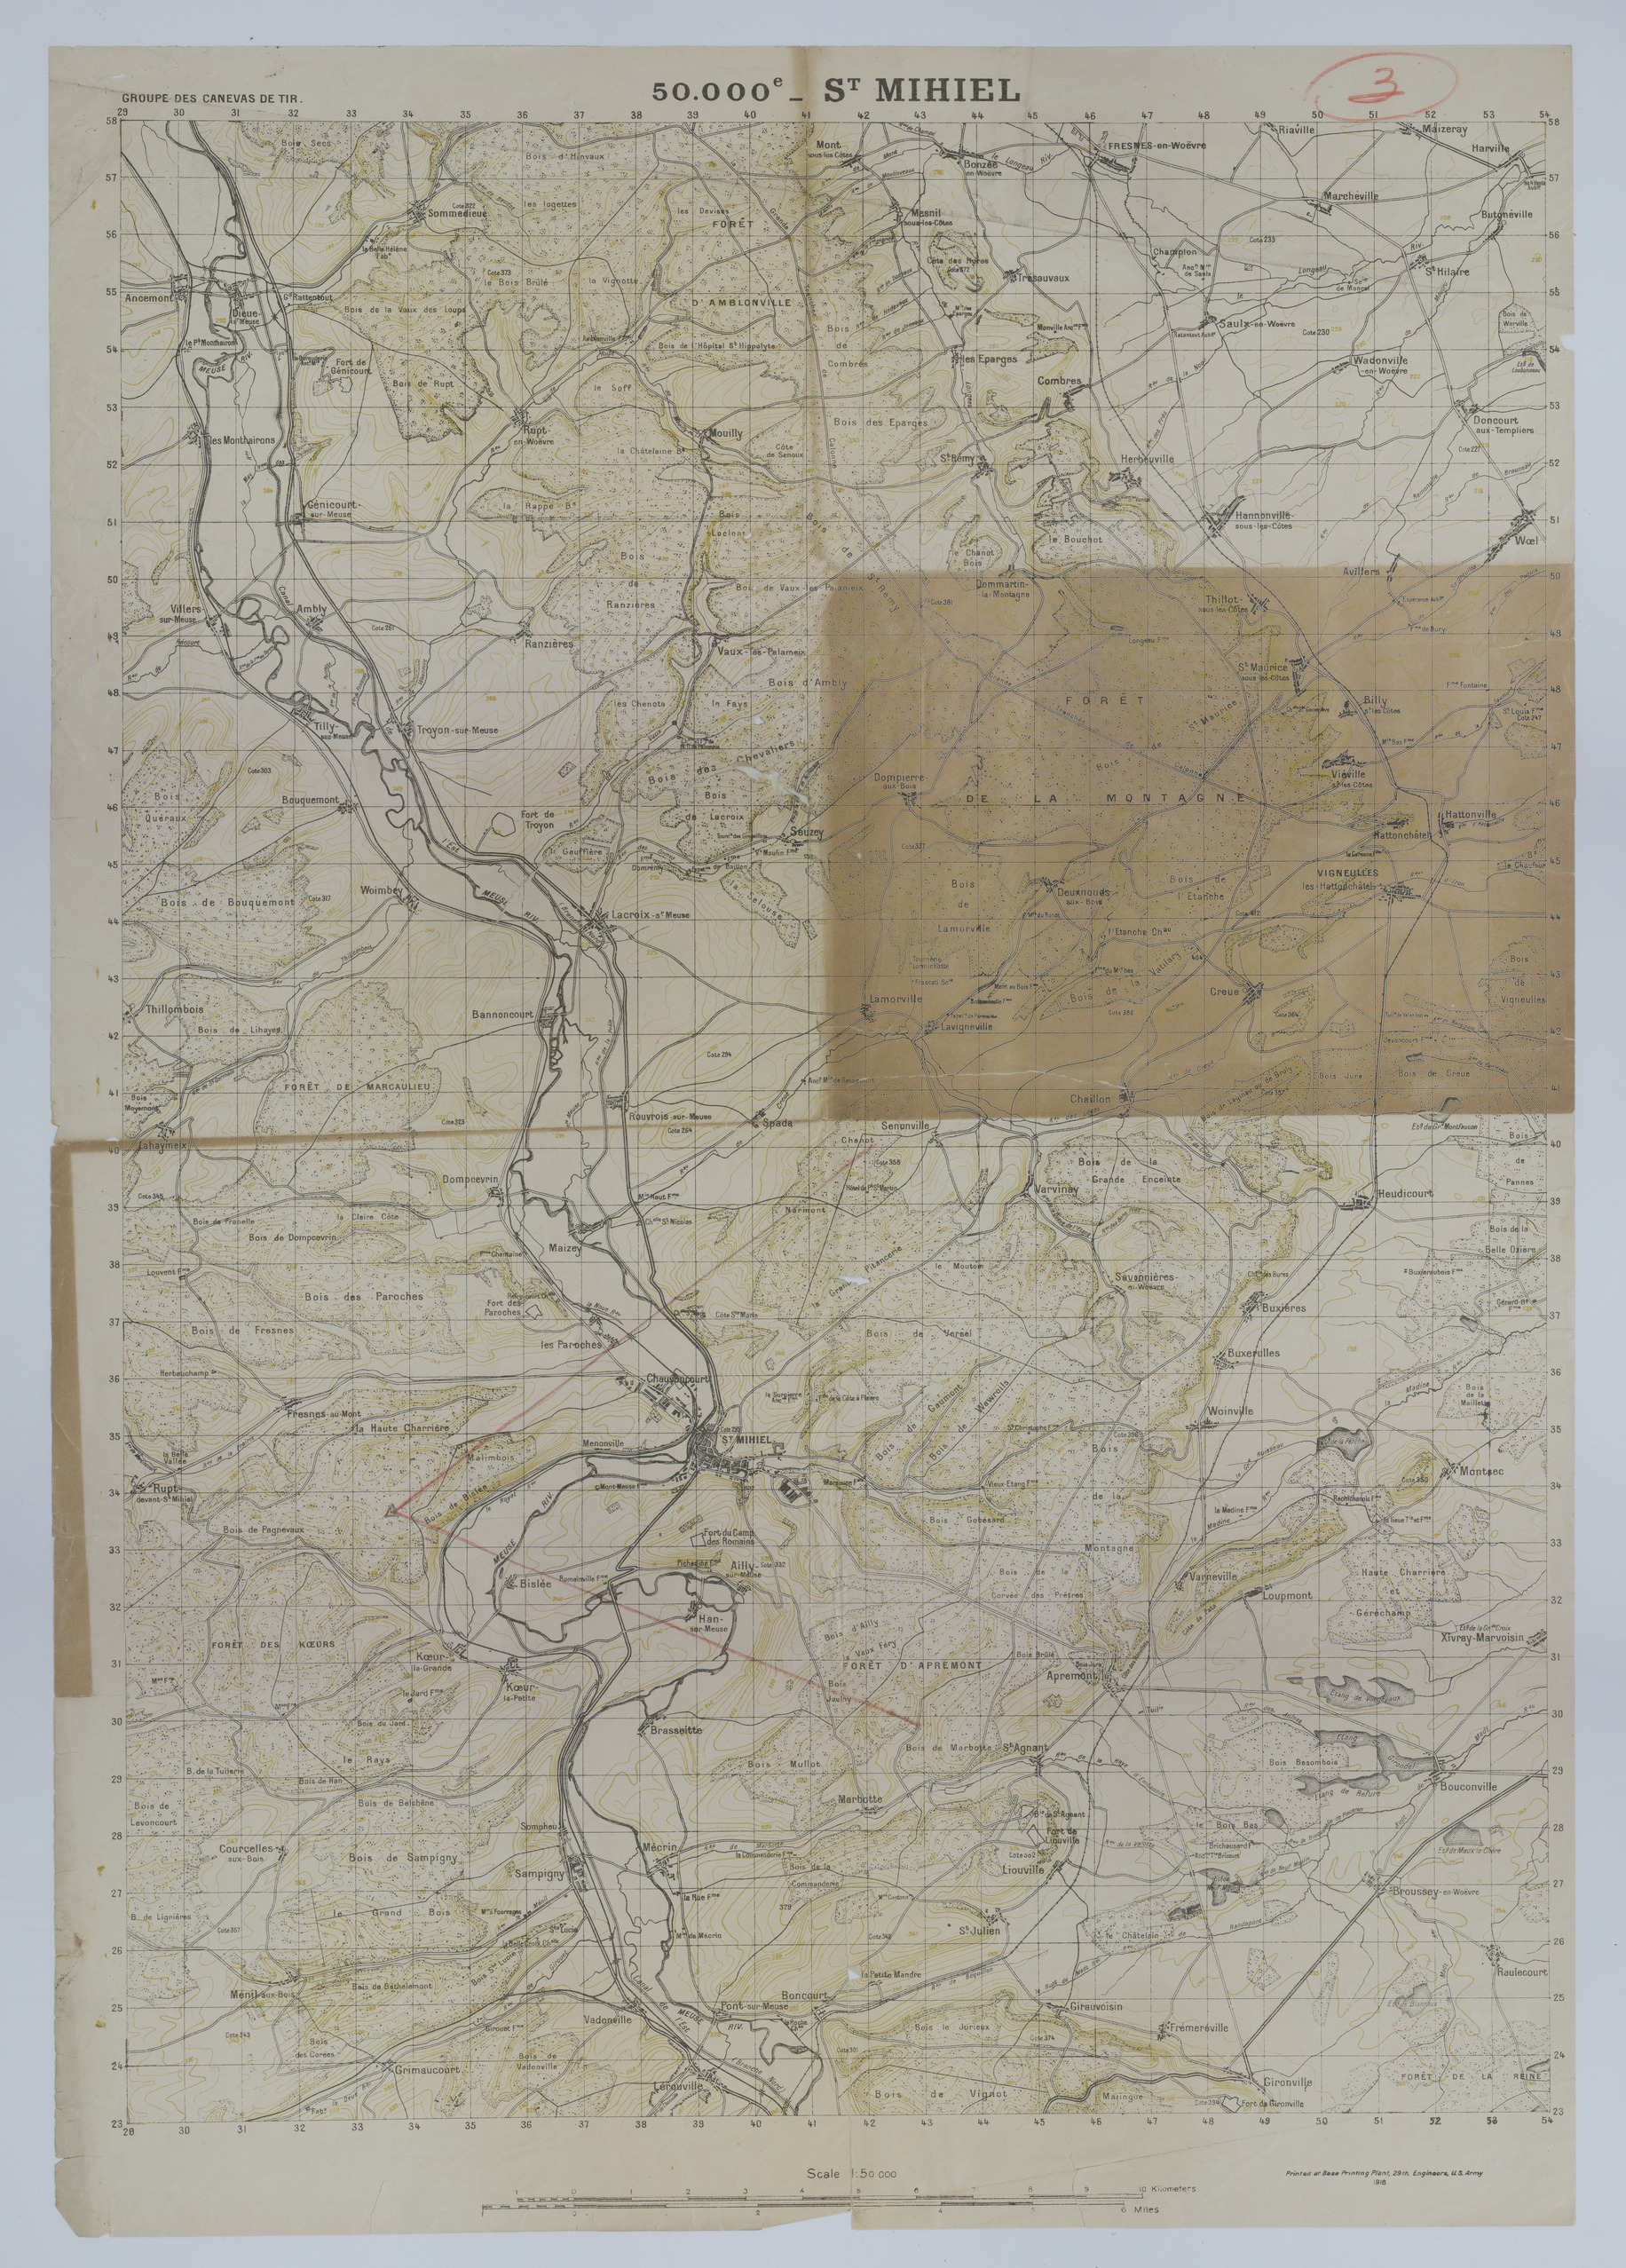 Map of the Area Covered From an Observation Post Near St. Mihiel